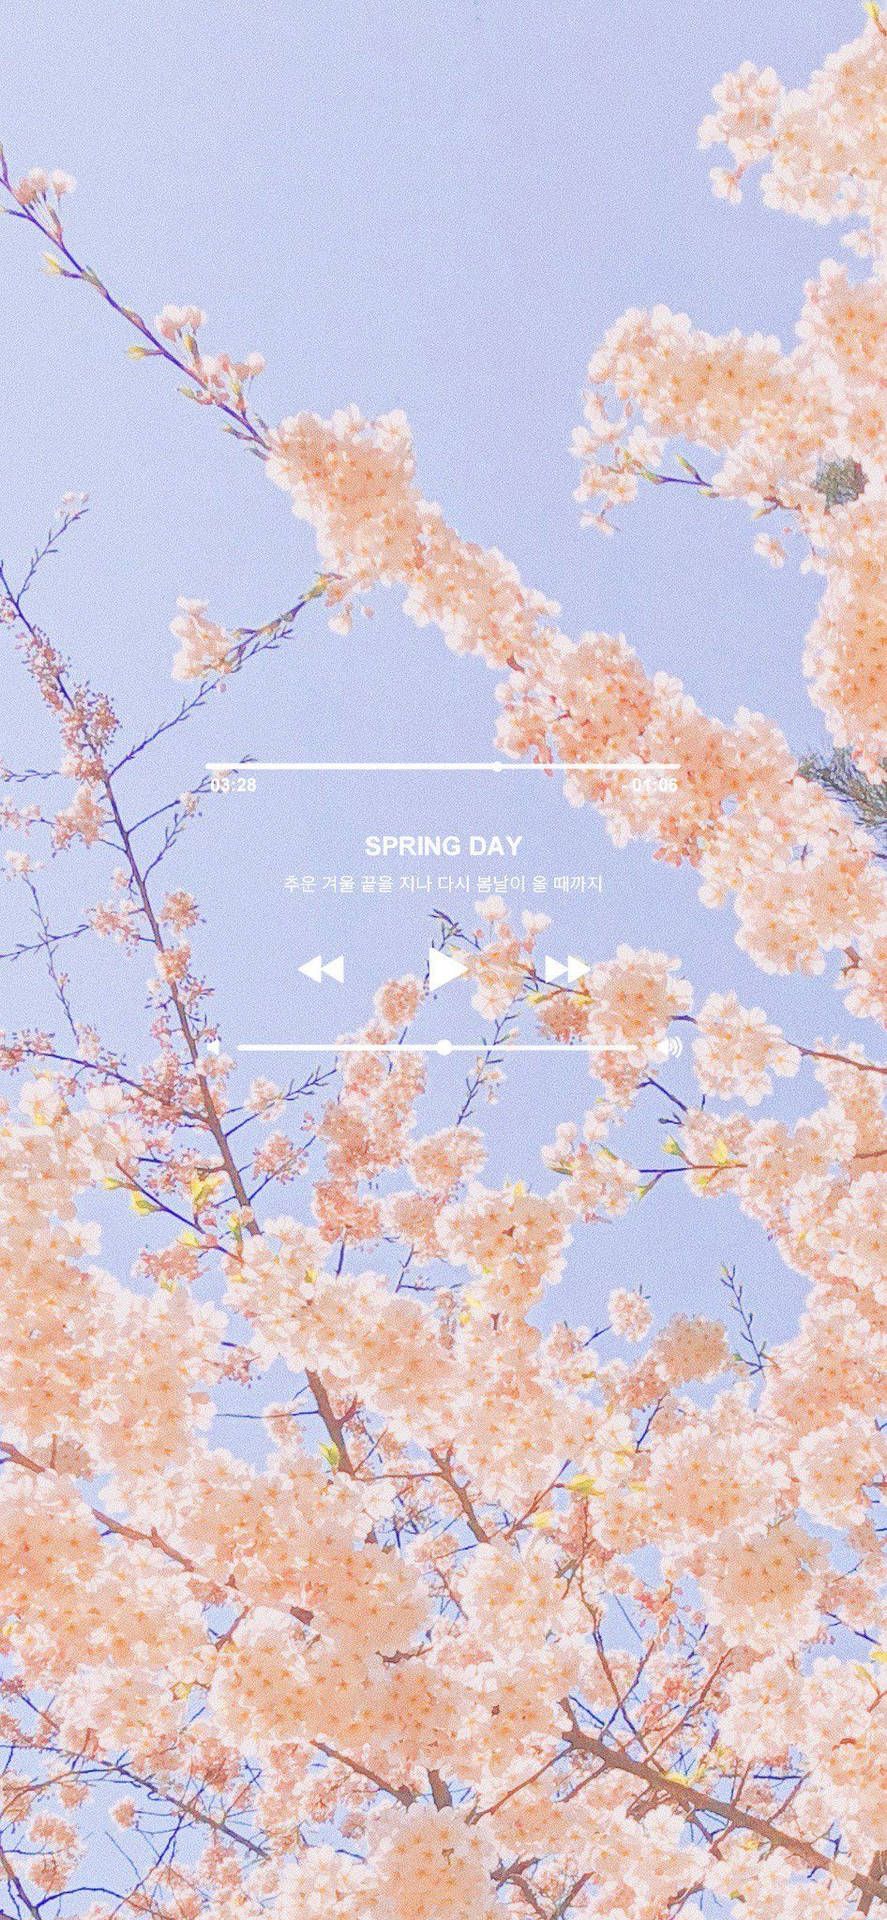 Aesthetic spring wallpaper with a tree and bird - Spring